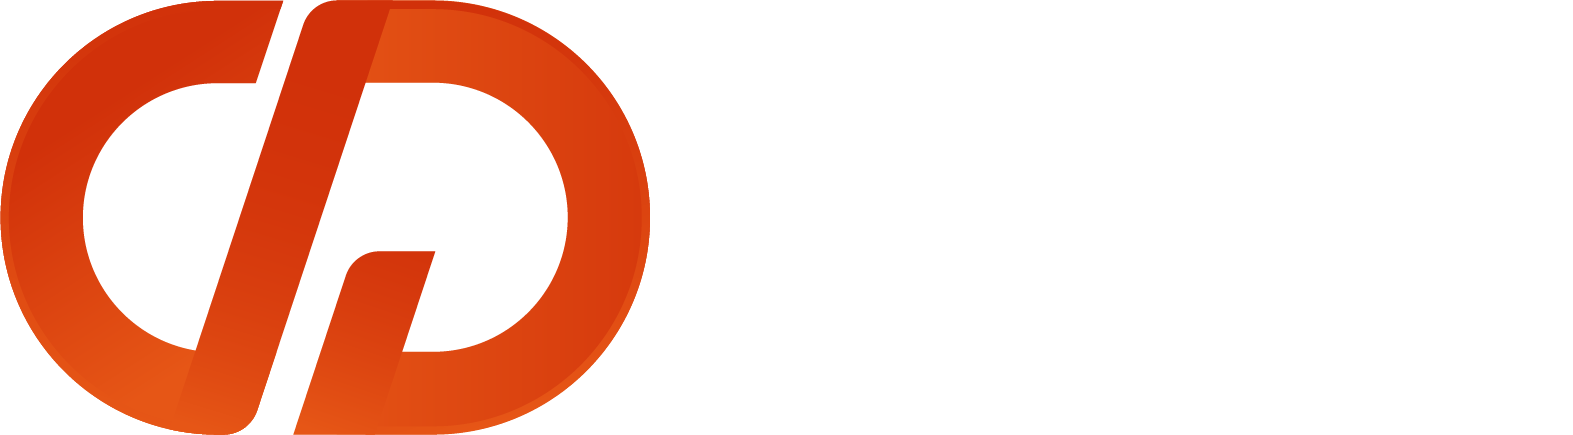 Credesk Services